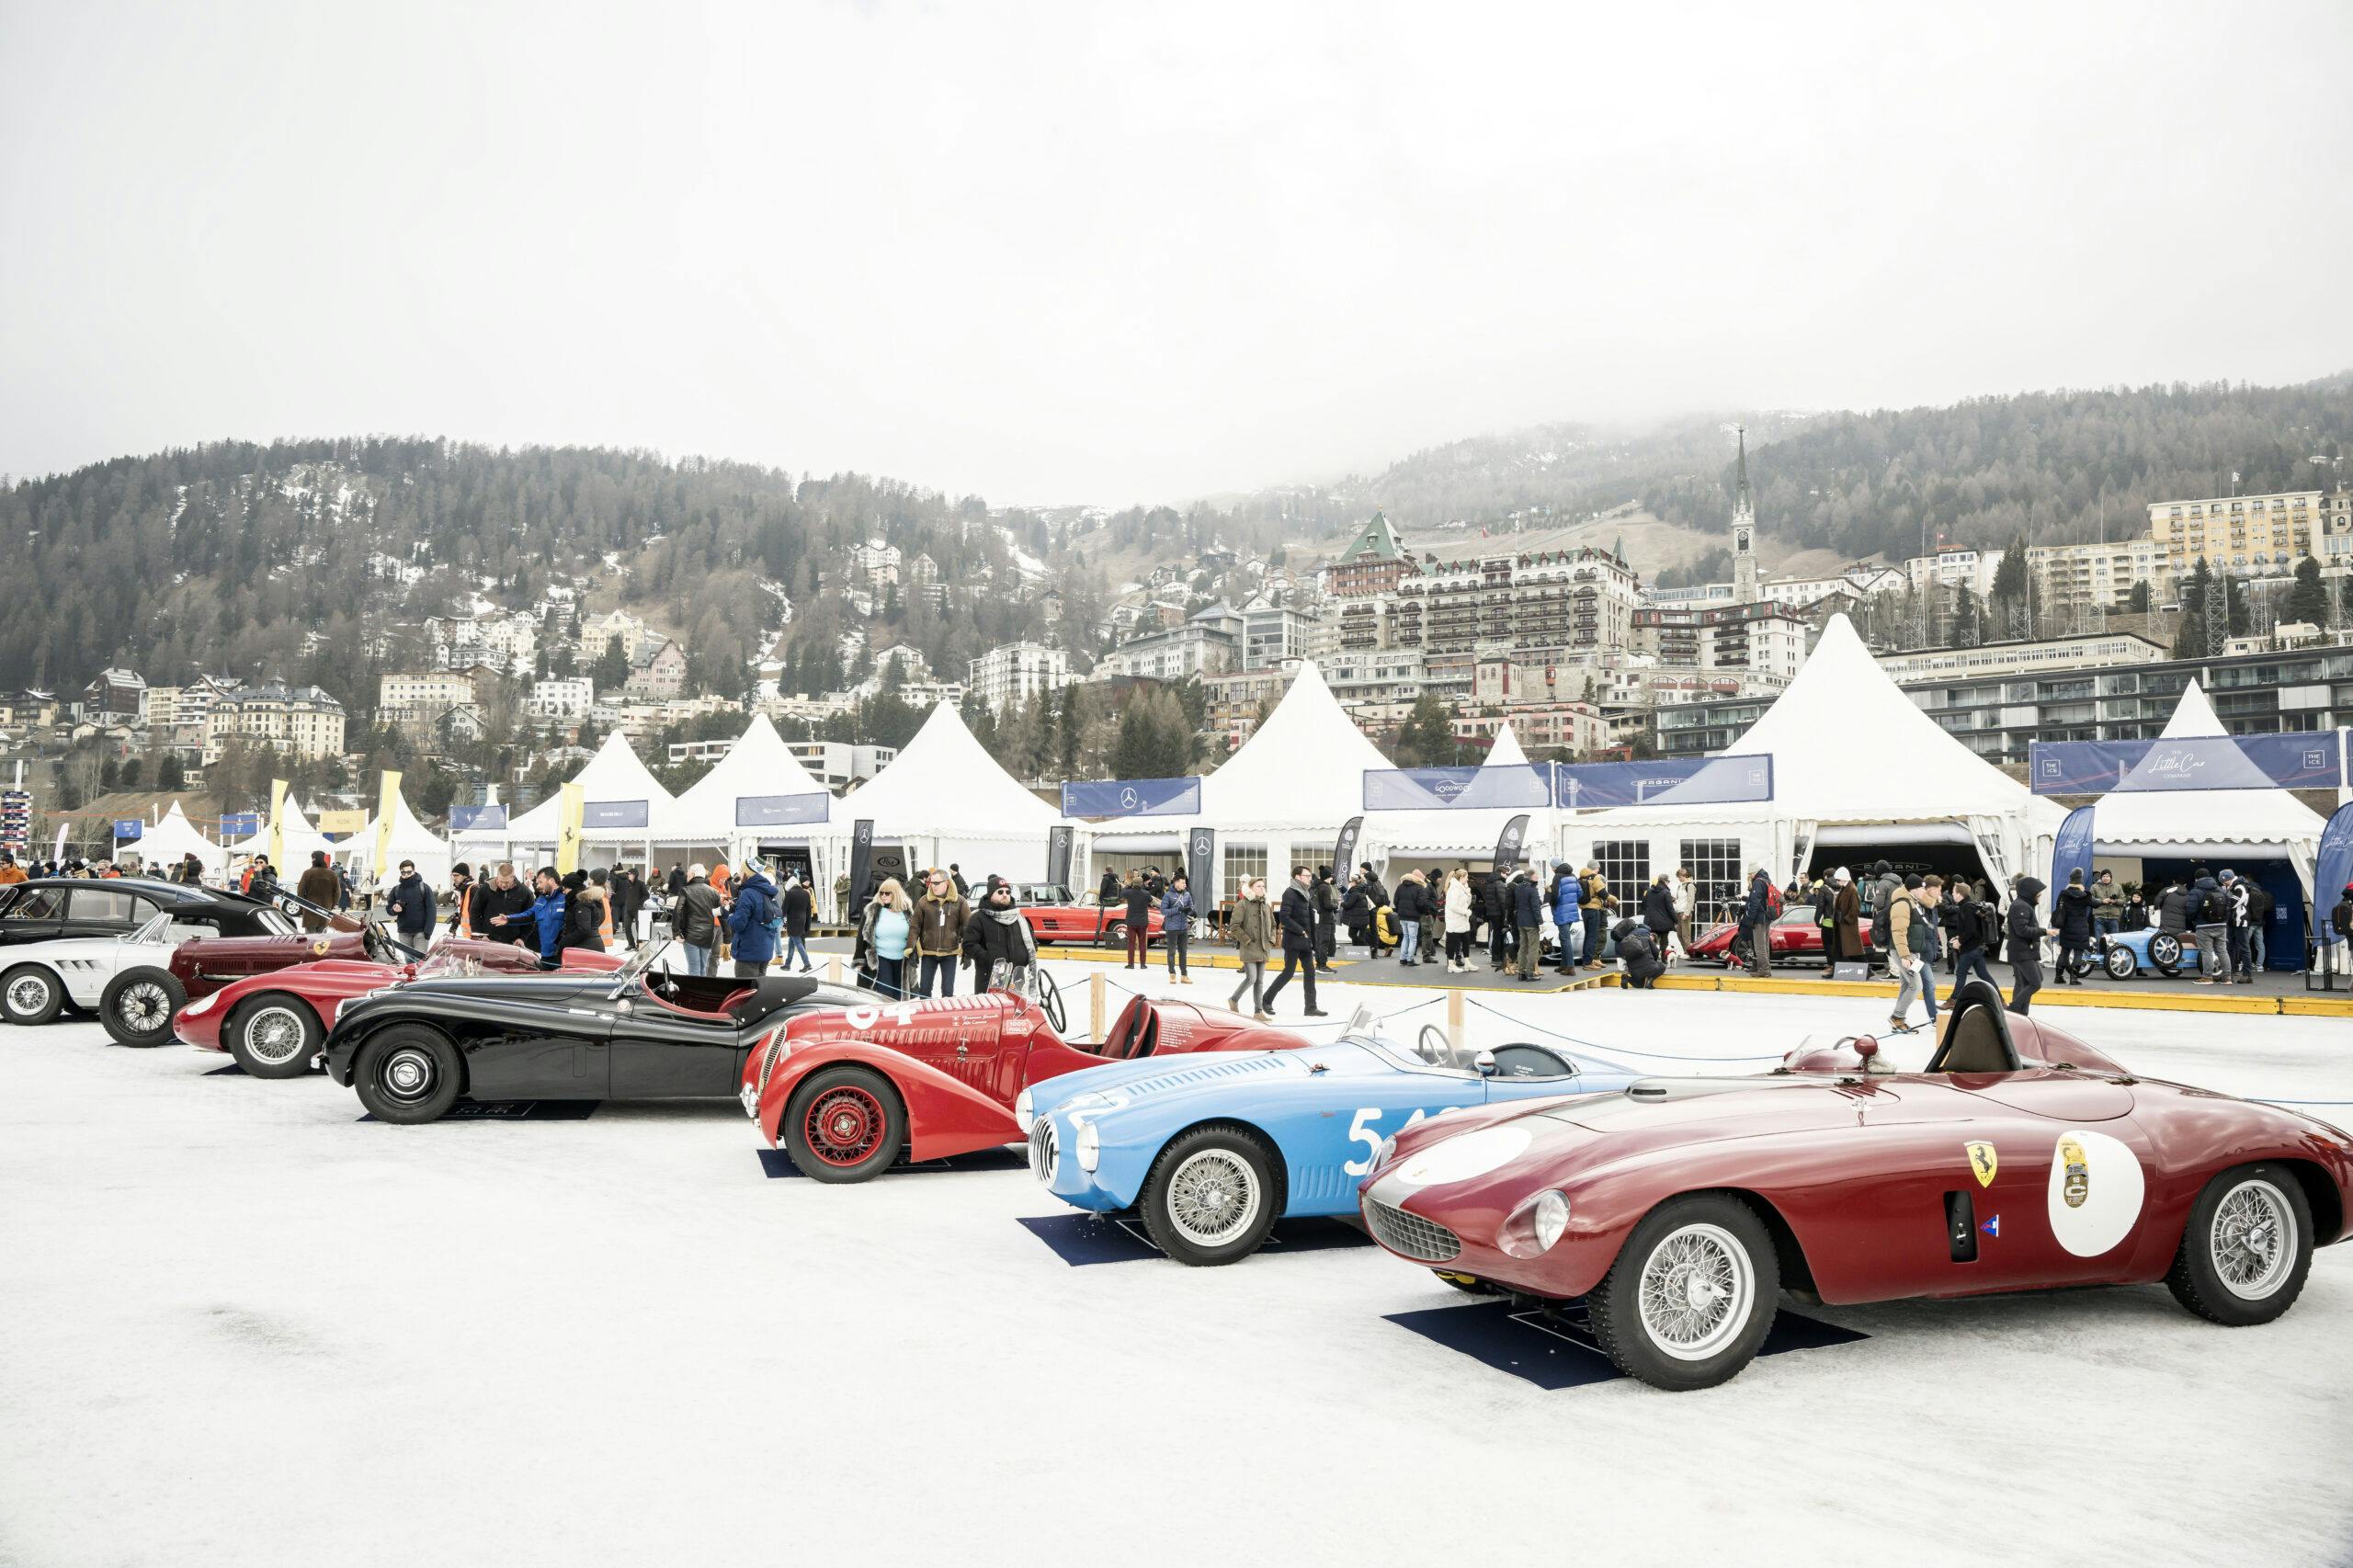 Barchettas on the Lake line up at The Ice St Moritz